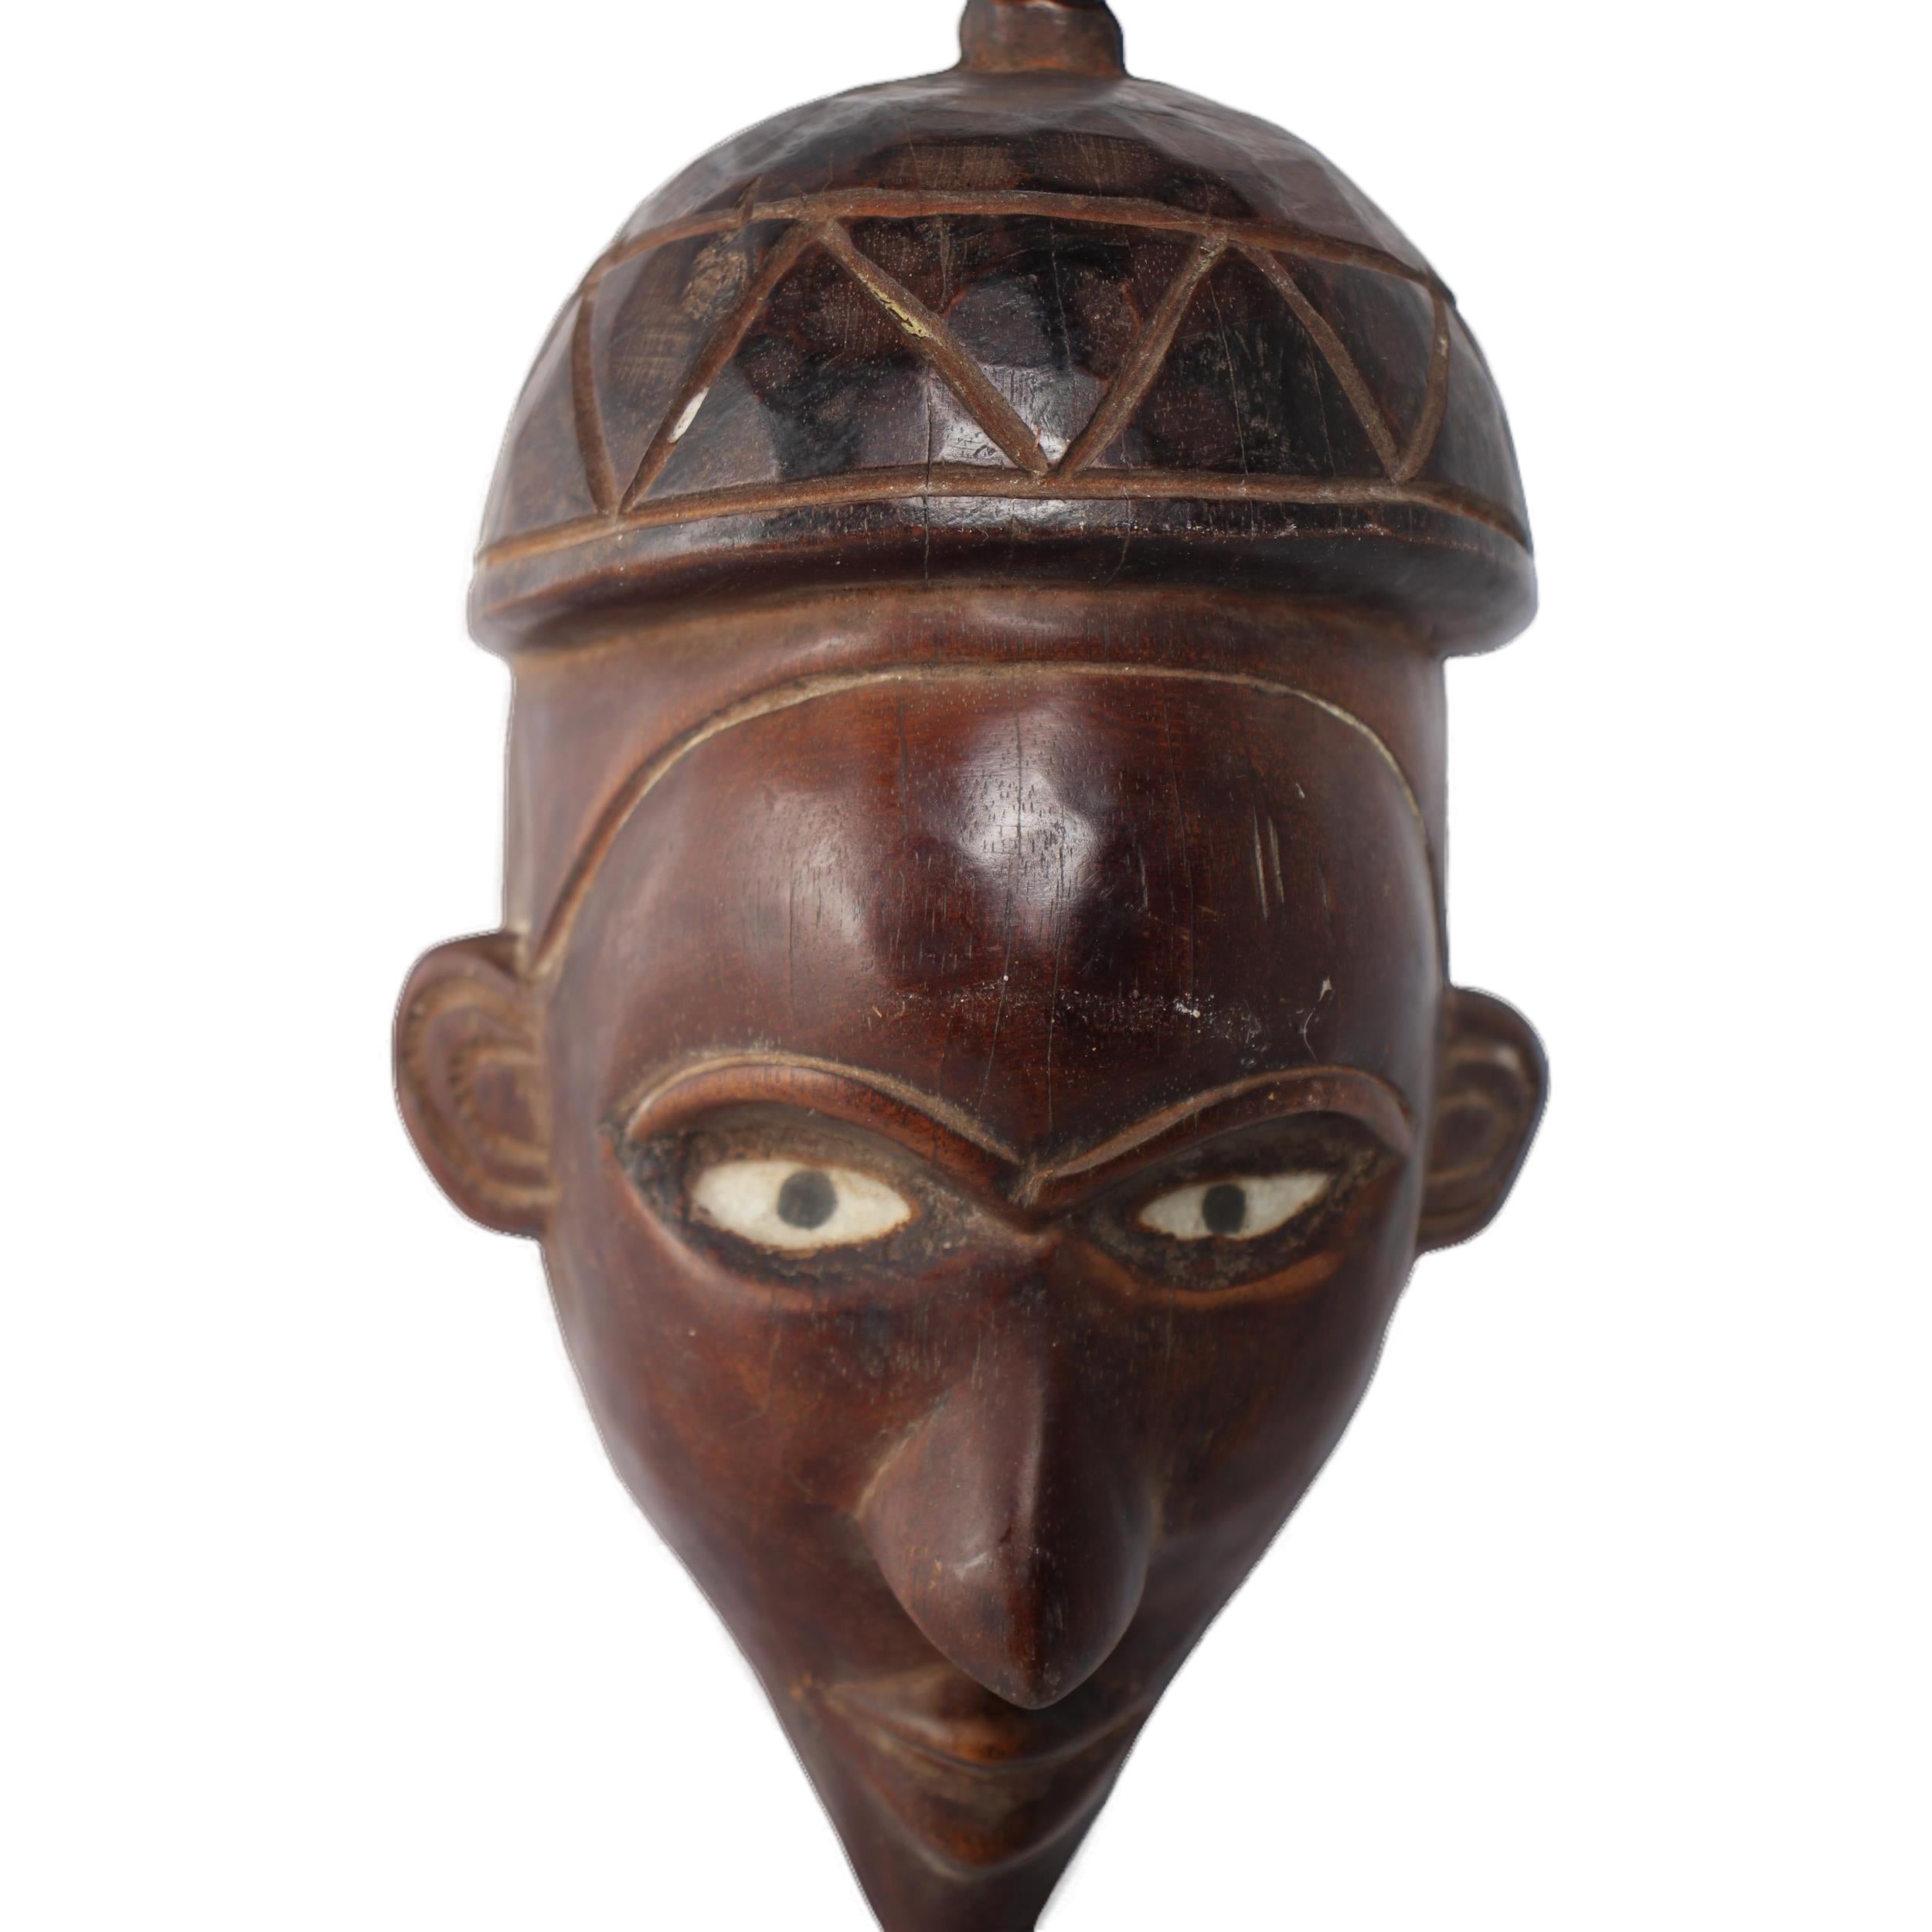 Pende Tribe Mask ~8.7" Tall - Mask